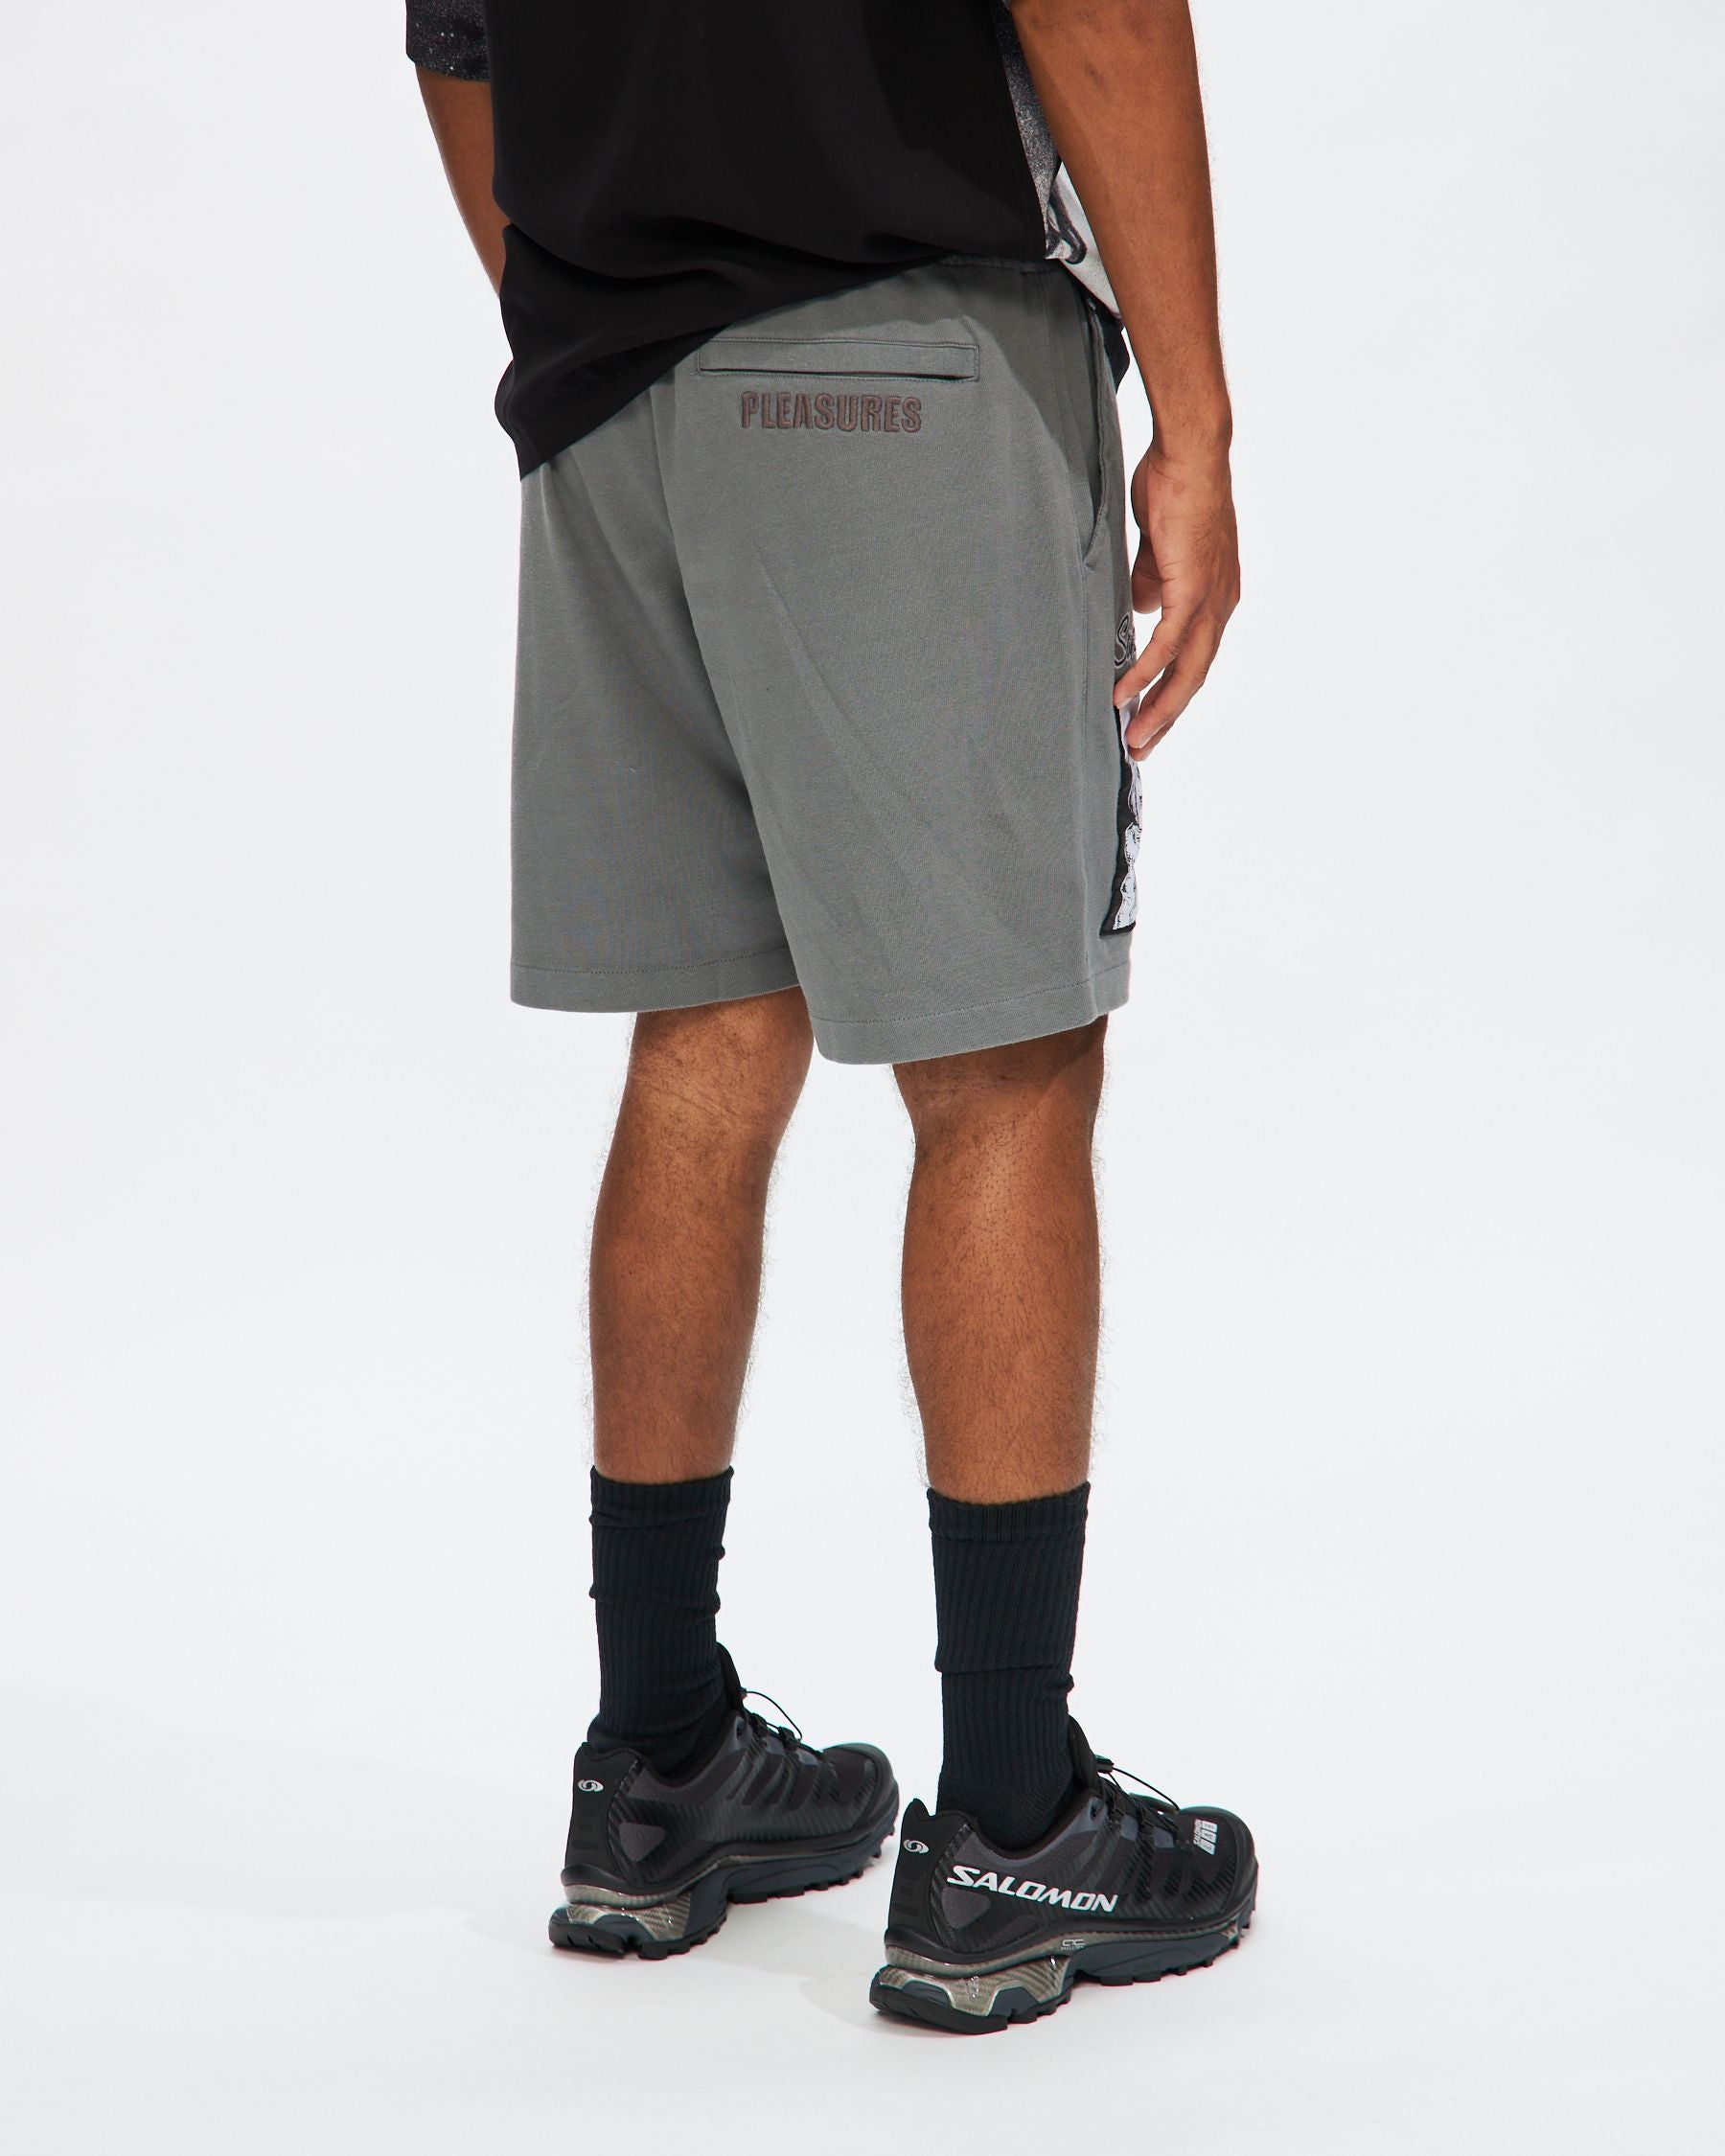 Singer Shorts in Charcoal